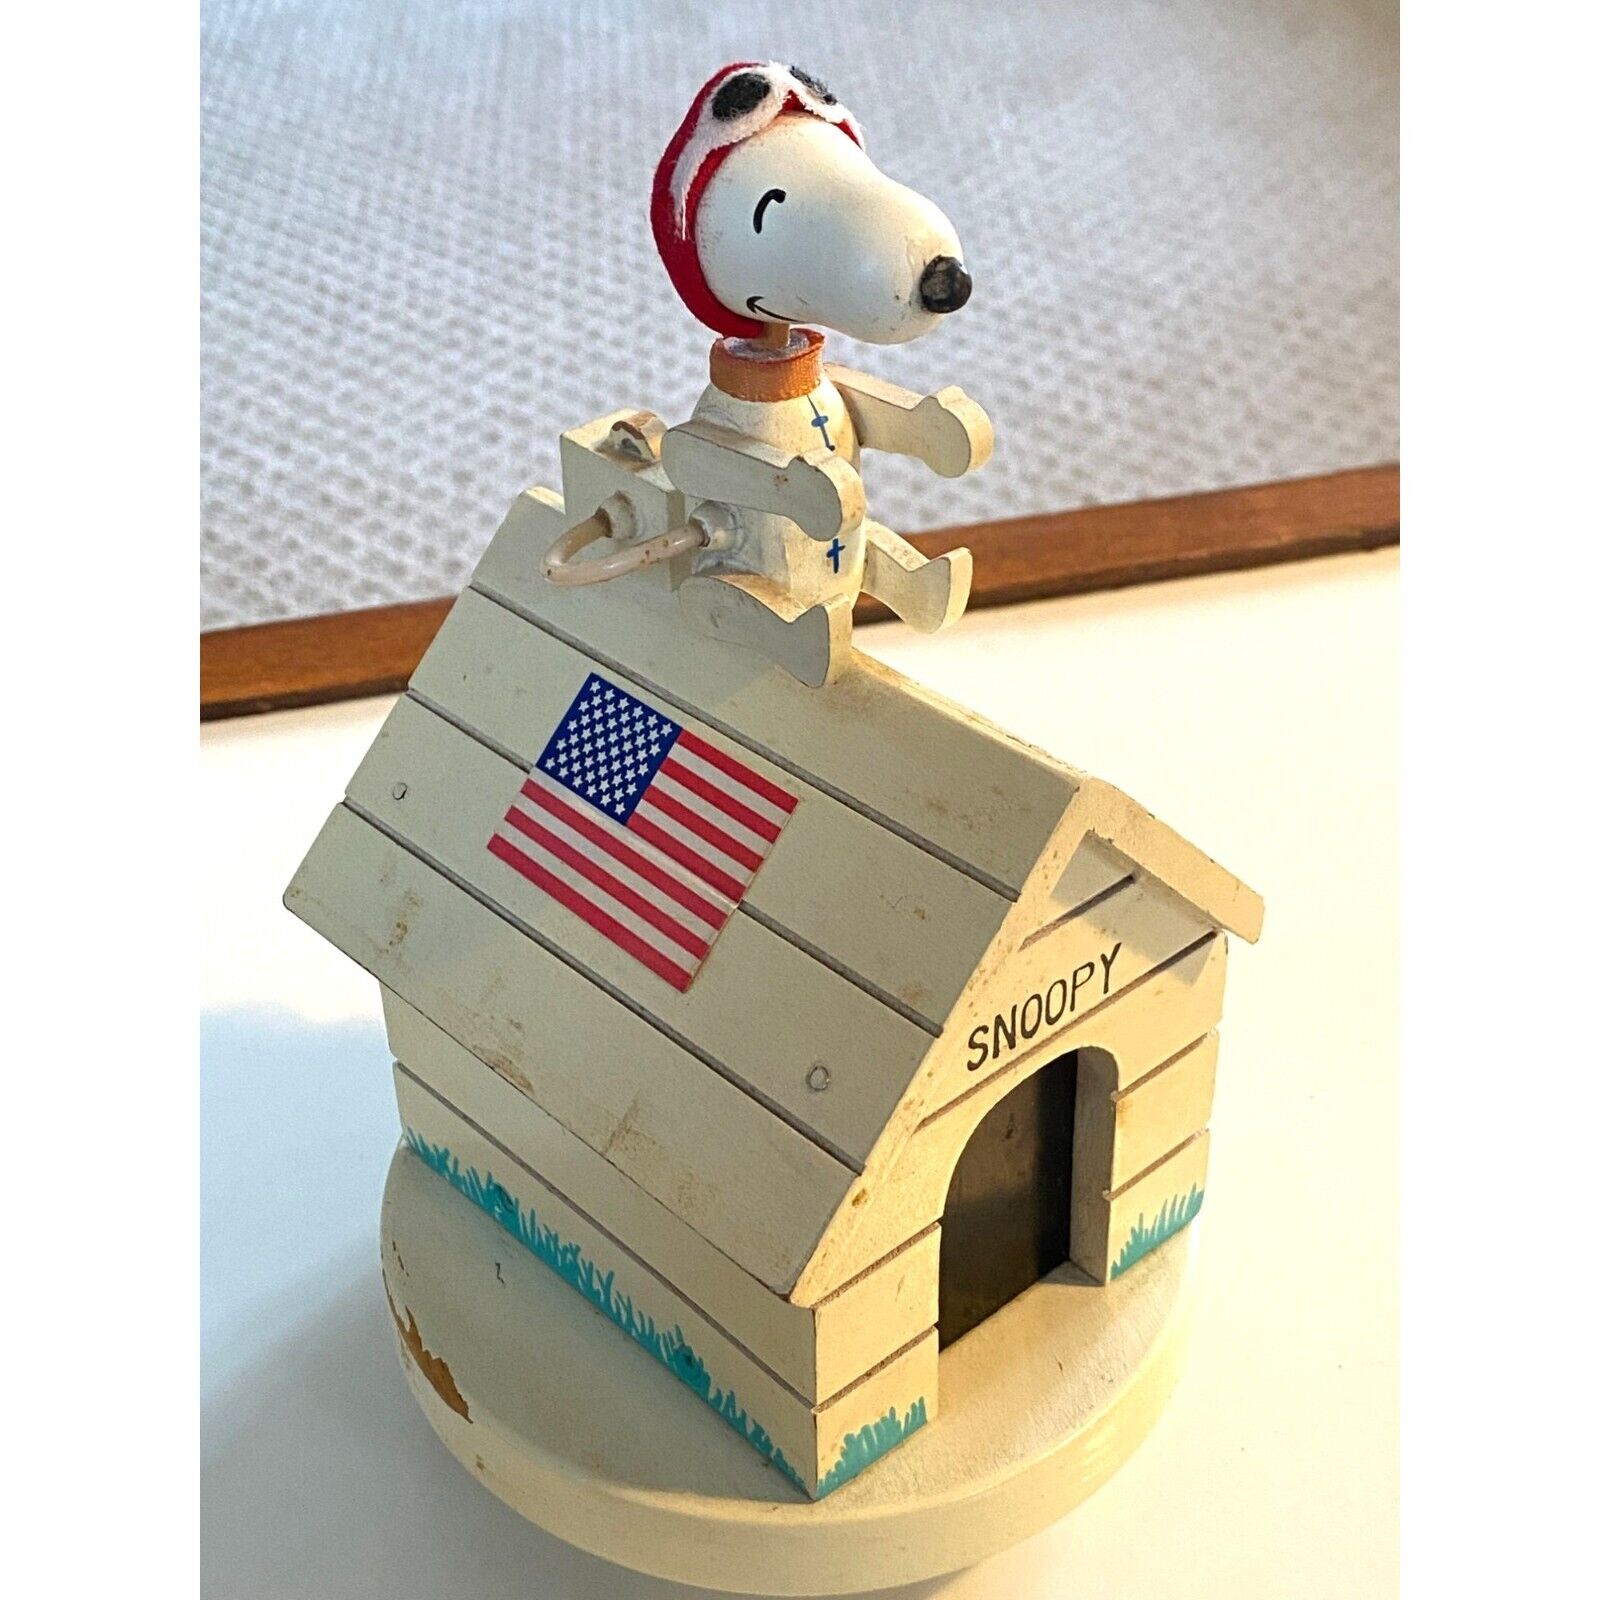 1969 Astronaut Snoopy Music Box Fly Me To the Moon Schmid Japan, RARE Collector